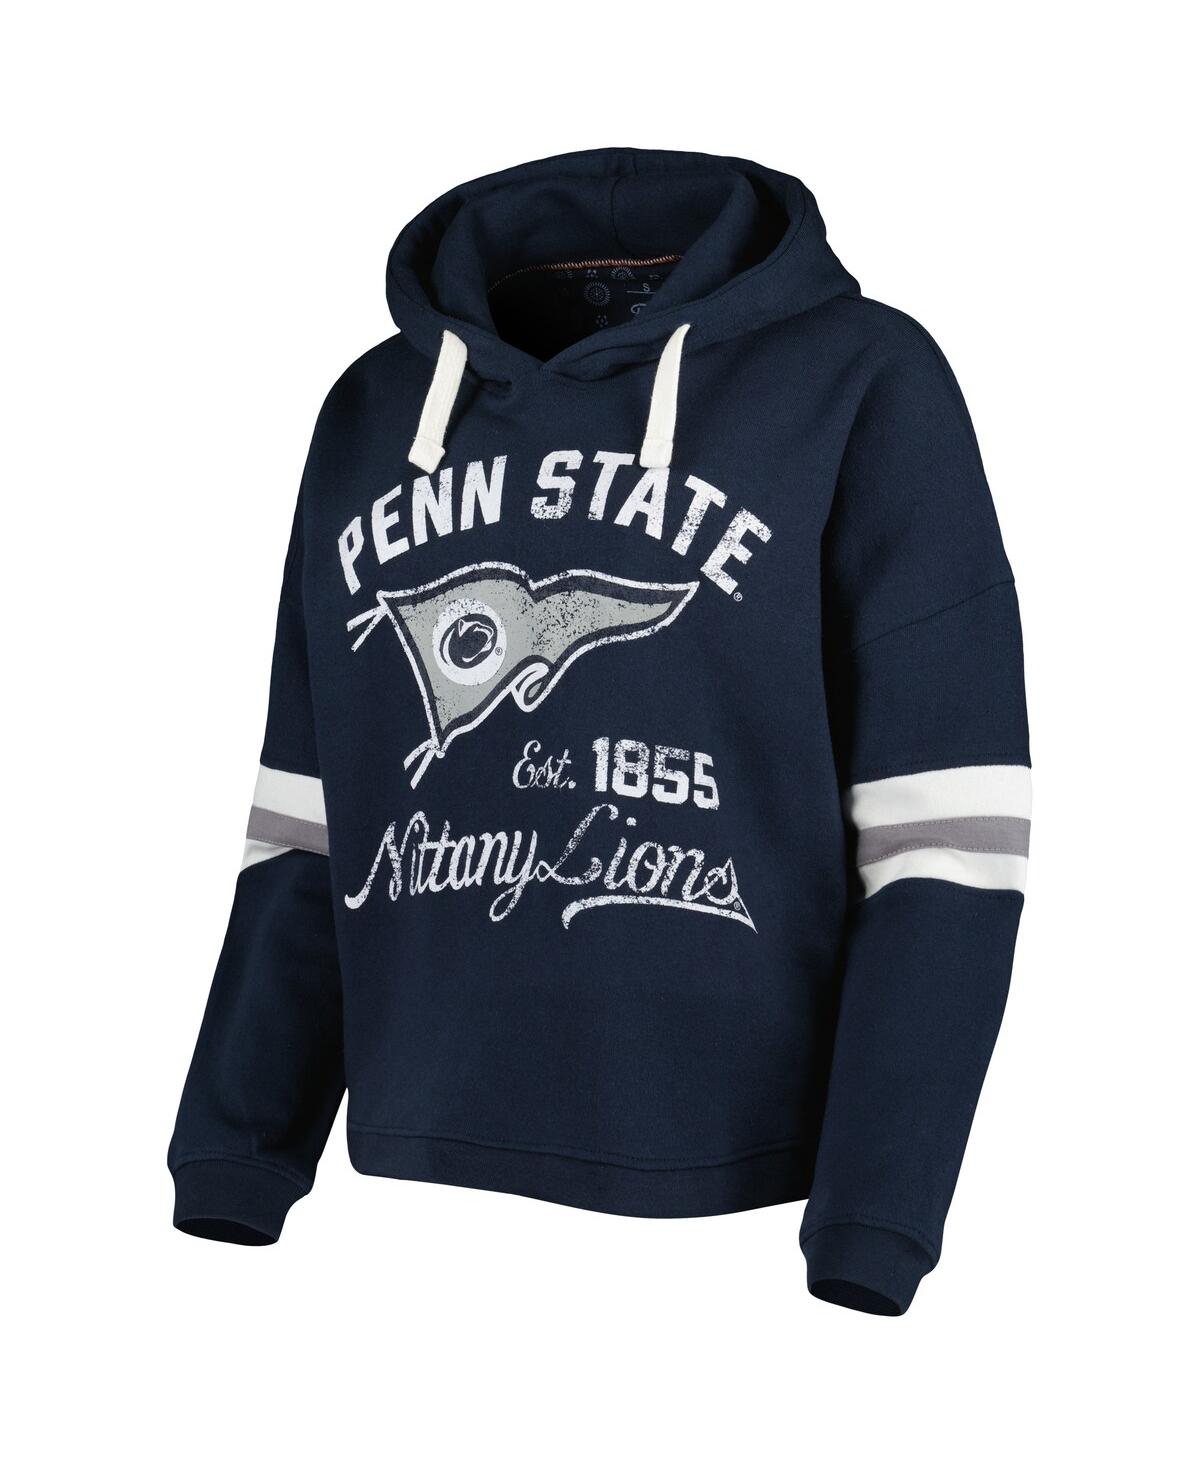 Shop Pressbox Women's  Navy Distressed Penn State Nittany Lions Super Pennant Pullover Hoodie